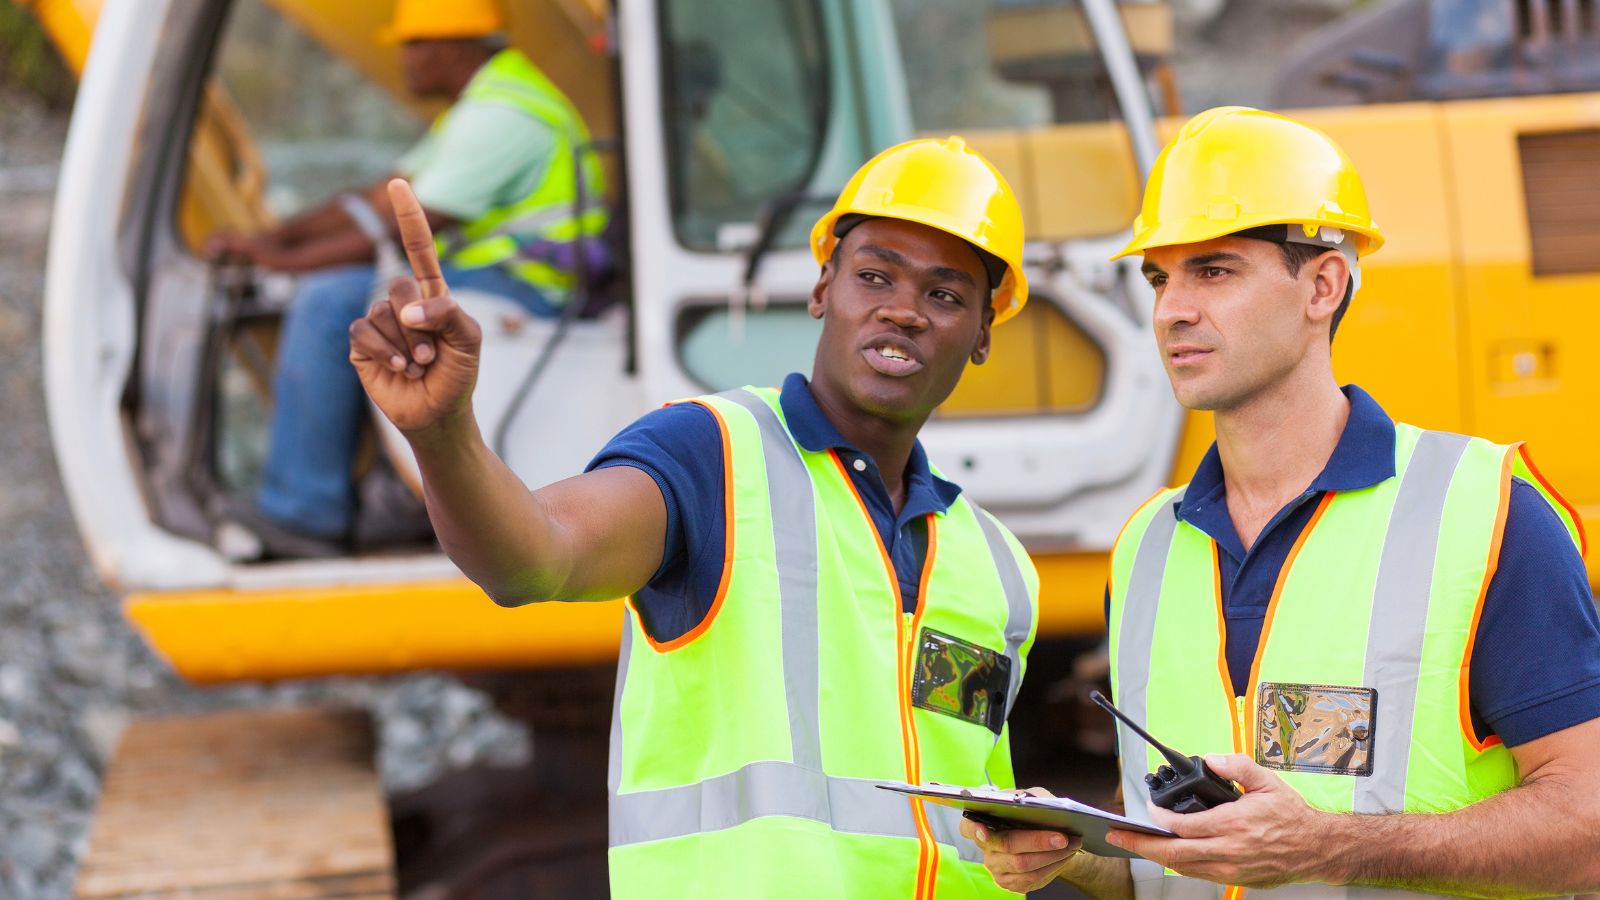 <p>Construction managers keep an eye on building projects, making sure everything gets done on time and within budget. Their leadership and organizational skills pay off with good salaries. They often handle all sorts of projects, from residential homes to big commercial buildings, providing diverse and fulfilling career opportunities.</p>